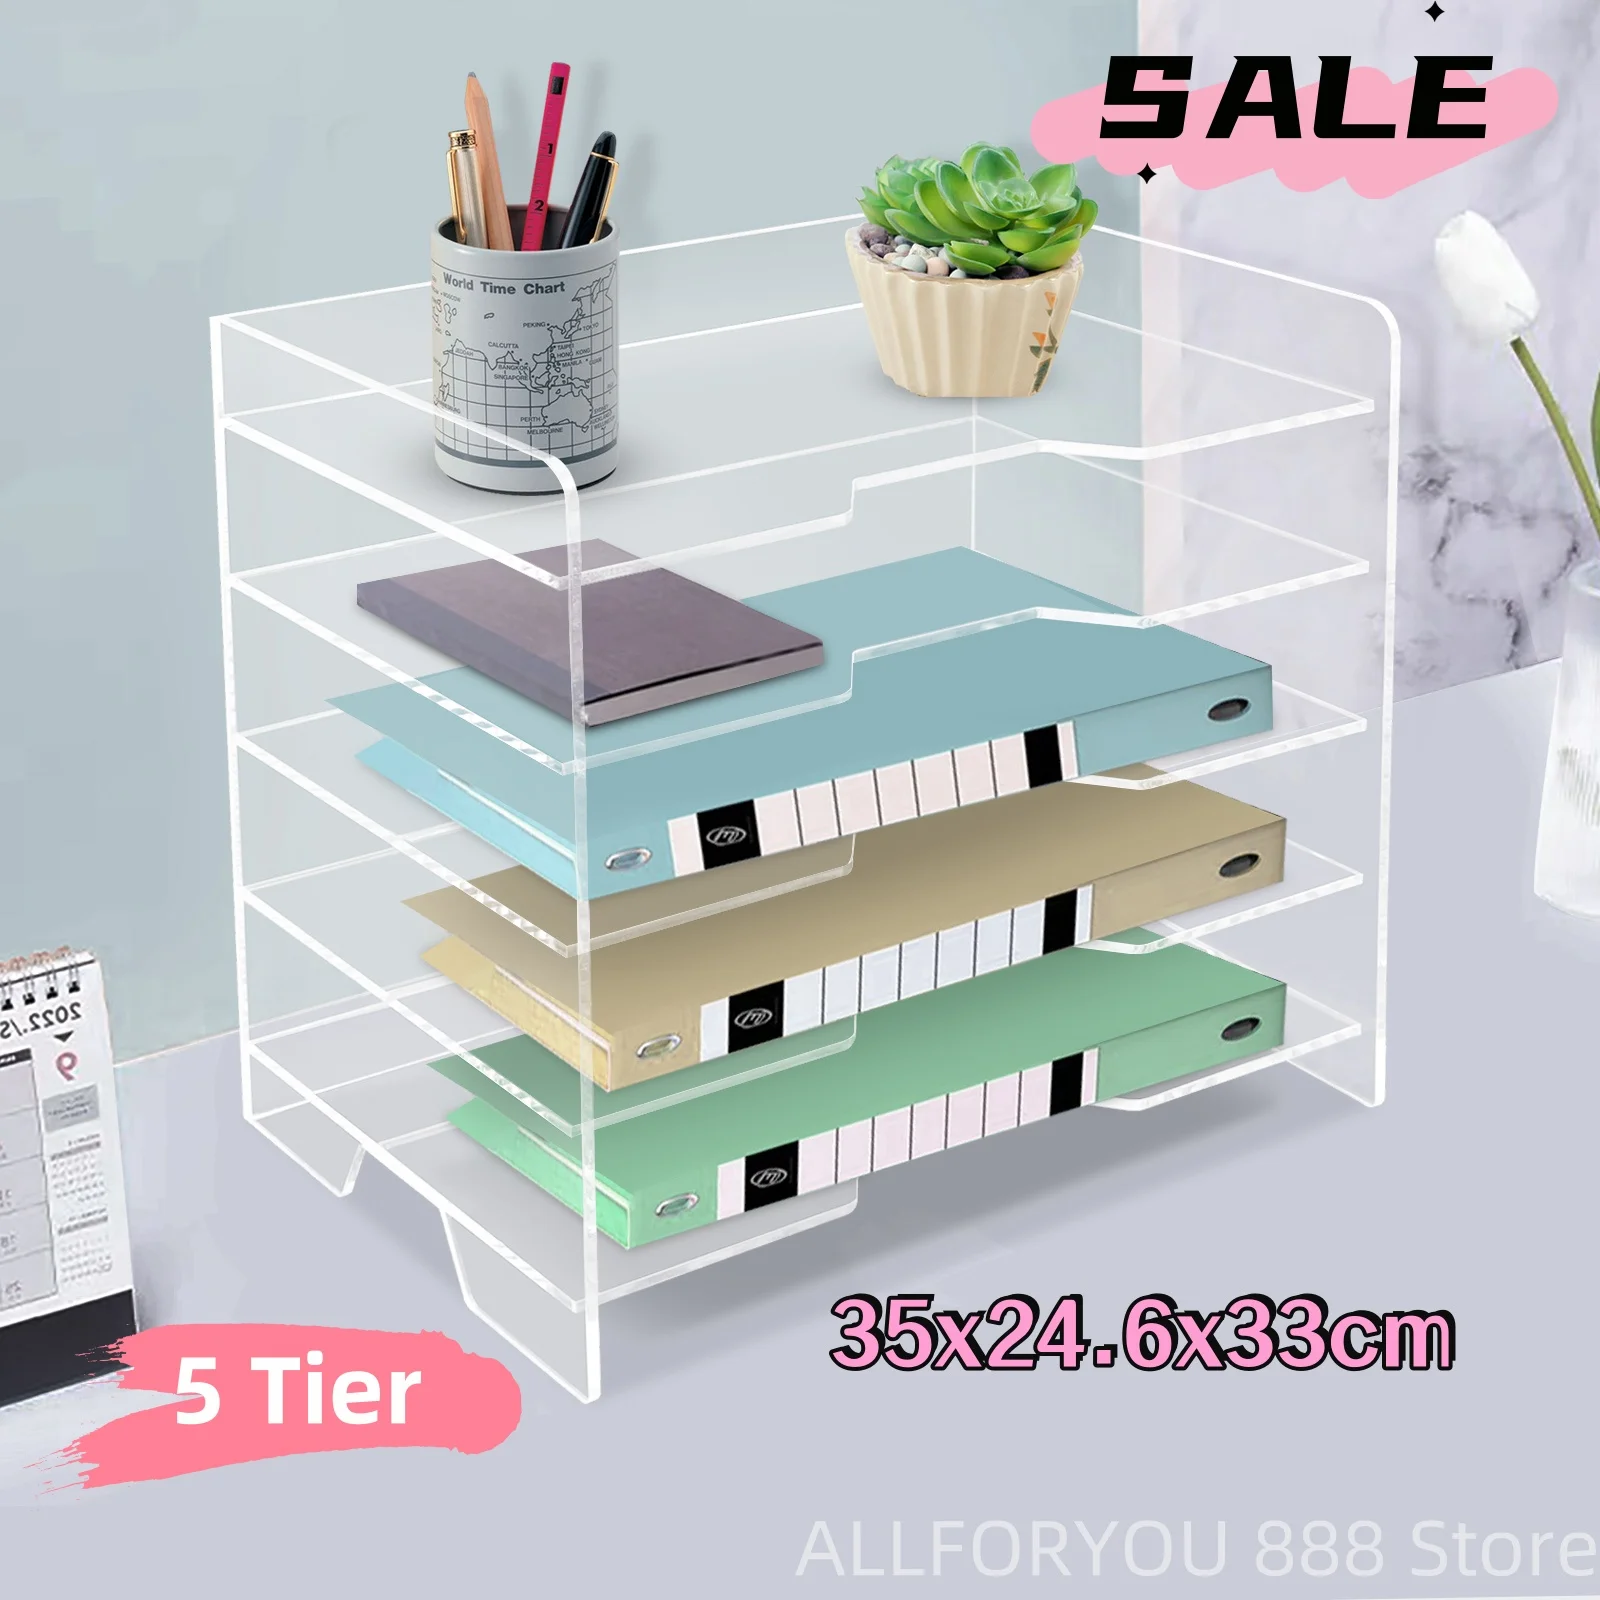 

35x24.6x33cm 5 Tier Offices Study Room Desk File Organizer Holder with High-quality Material